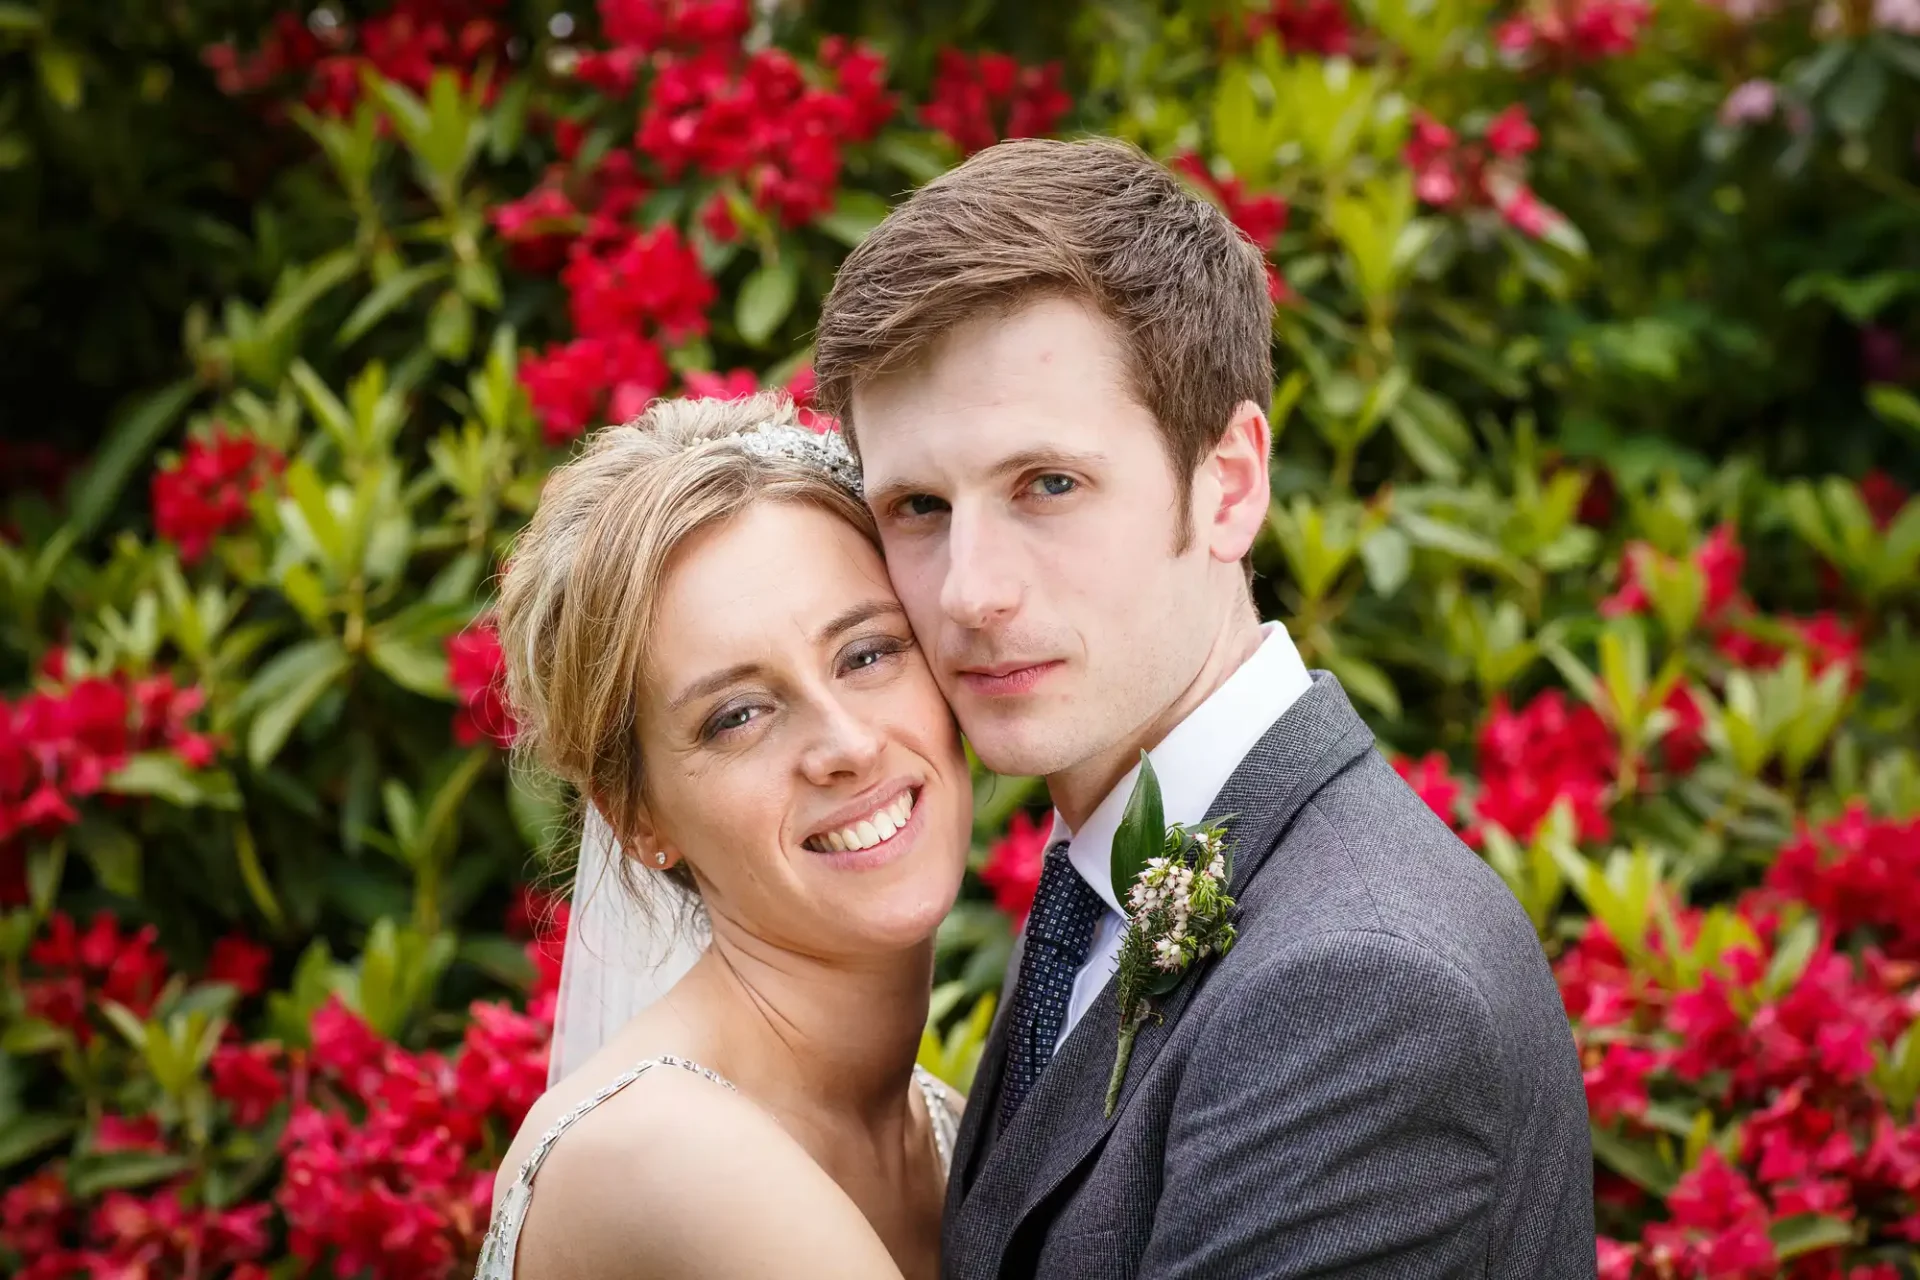 A bride and groom posing affectionately in front of vibrant red flowers.